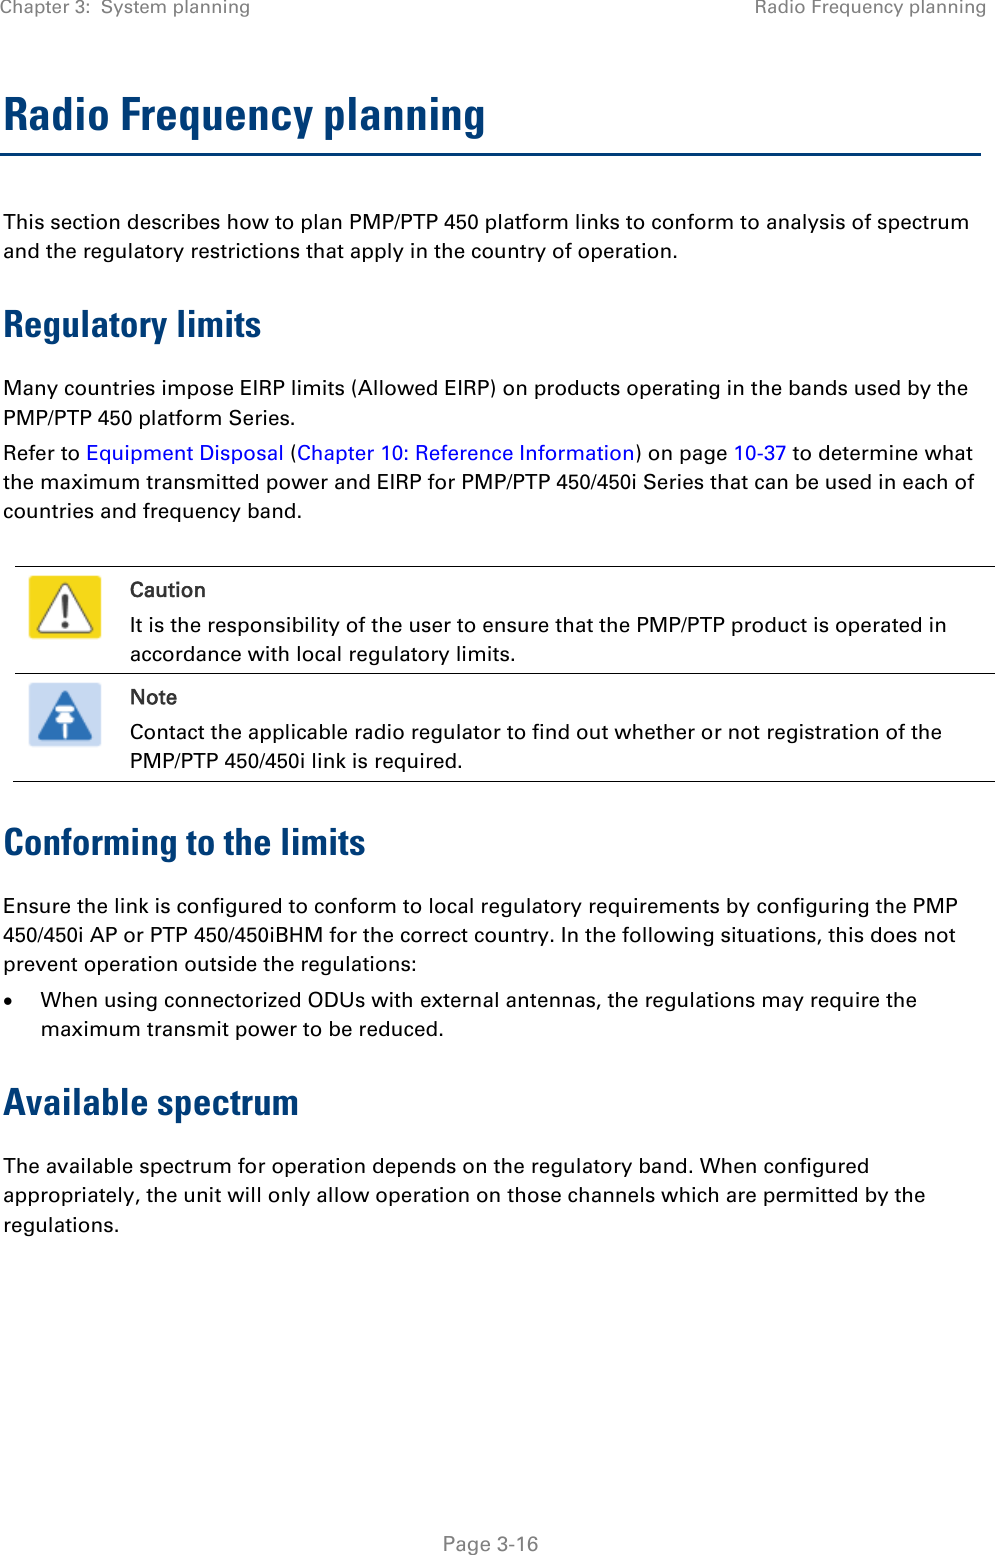 Chapter 3:  System planning Radio Frequency planning   Page 3-16 Radio Frequency planning This section describes how to plan PMP/PTP 450 platform links to conform to analysis of spectrum and the regulatory restrictions that apply in the country of operation. Regulatory limits Many countries impose EIRP limits (Allowed EIRP) on products operating in the bands used by the PMP/PTP 450 platform Series.  Refer to Equipment Disposal (Chapter 10: Reference Information) on page 10-37 to determine what the maximum transmitted power and EIRP for PMP/PTP 450/450i Series that can be used in each of countries and frequency band.   Caution It is the responsibility of the user to ensure that the PMP/PTP product is operated in accordance with local regulatory limits.  Note Contact the applicable radio regulator to find out whether or not registration of the PMP/PTP 450/450i link is required. Conforming to the limits Ensure the link is configured to conform to local regulatory requirements by configuring the PMP 450/450i AP or PTP 450/450iBHM for the correct country. In the following situations, this does not prevent operation outside the regulations:  When using connectorized ODUs with external antennas, the regulations may require the maximum transmit power to be reduced. Available spectrum The available spectrum for operation depends on the regulatory band. When configured appropriately, the unit will only allow operation on those channels which are permitted by the regulations.     